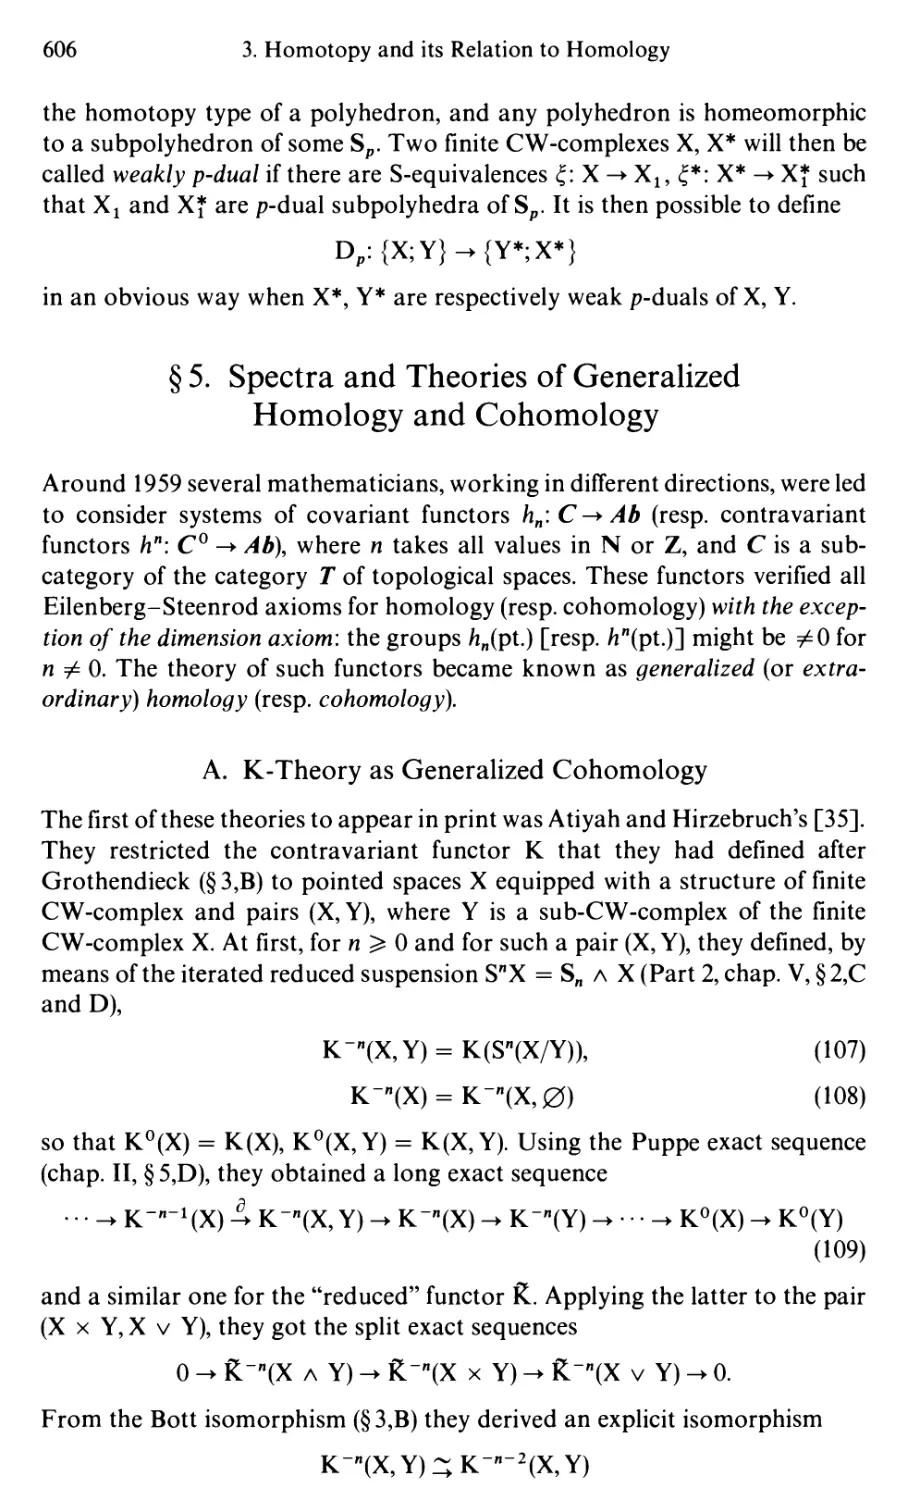 §5. Spectra and Theories of Generalized Homology and Cohomology